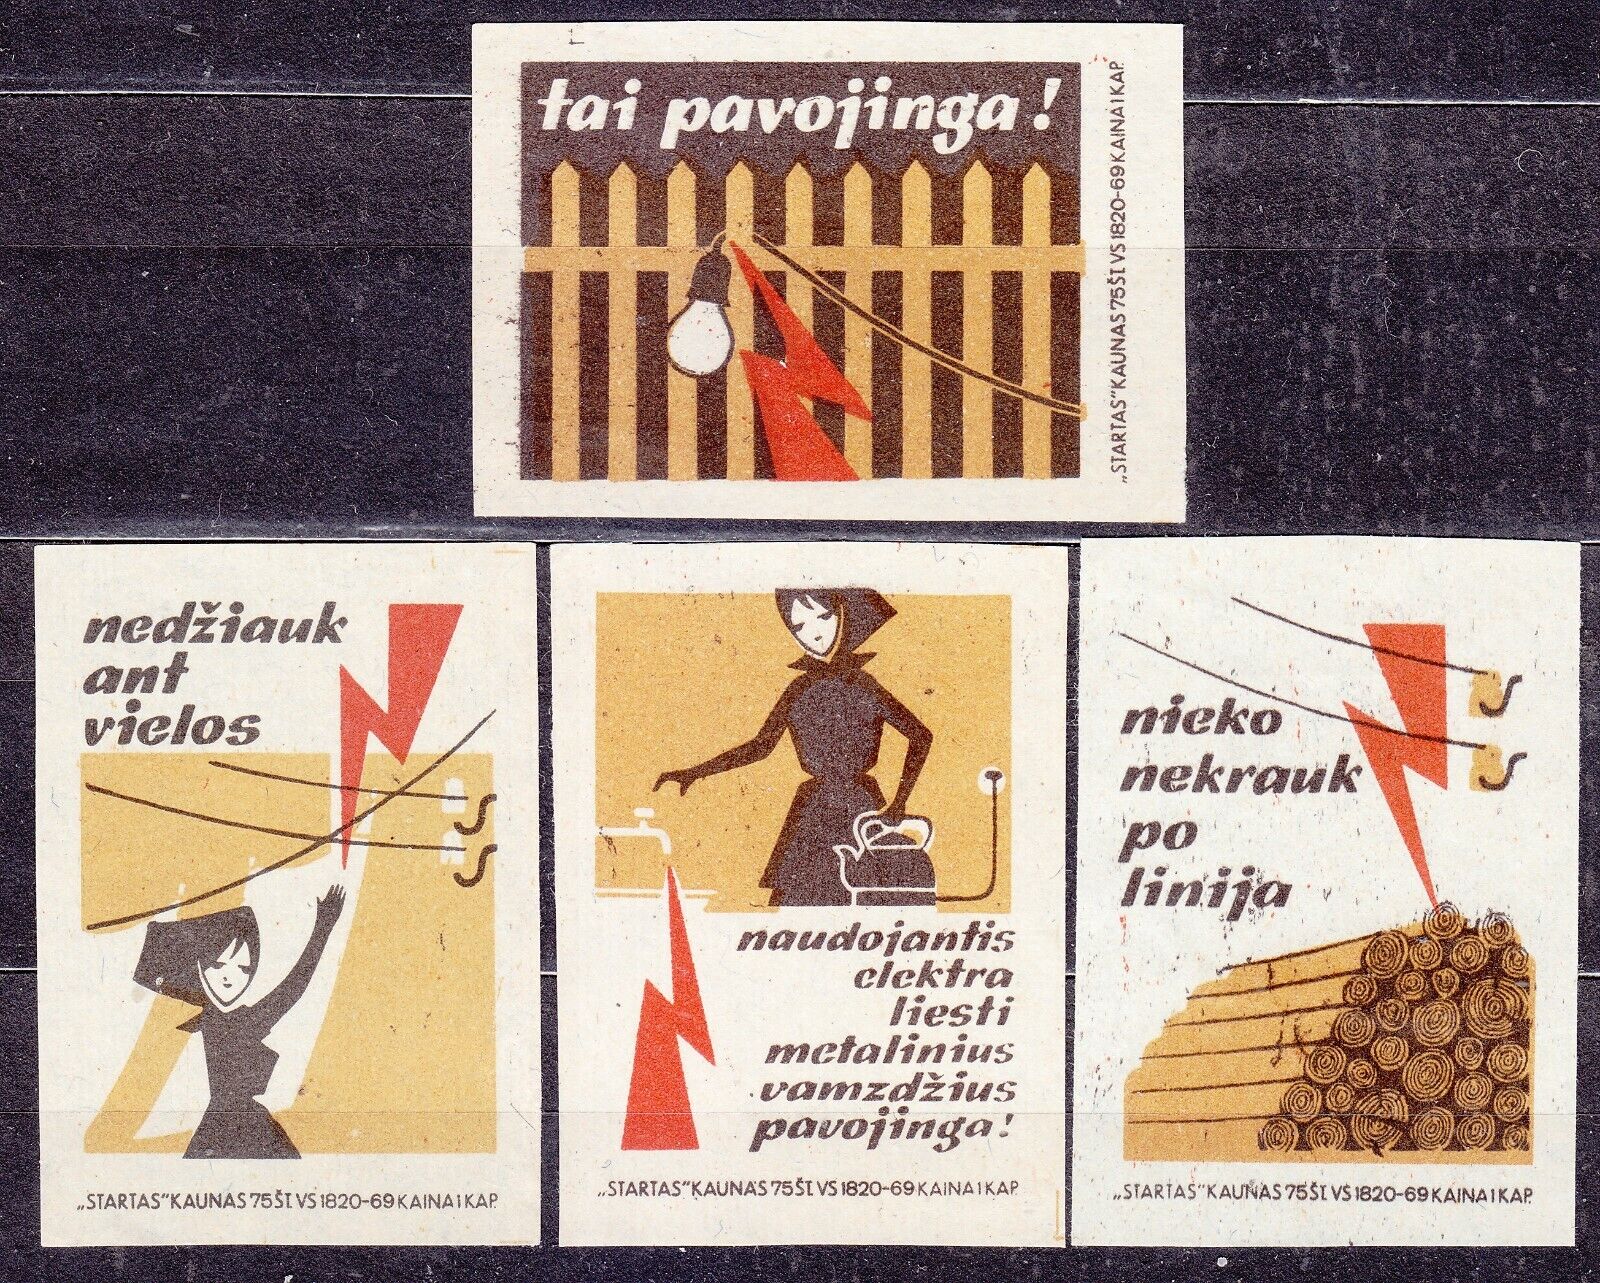 SU LTSR 1971 Matchbox Label #06-4 set, Follow the rules for handling electricity